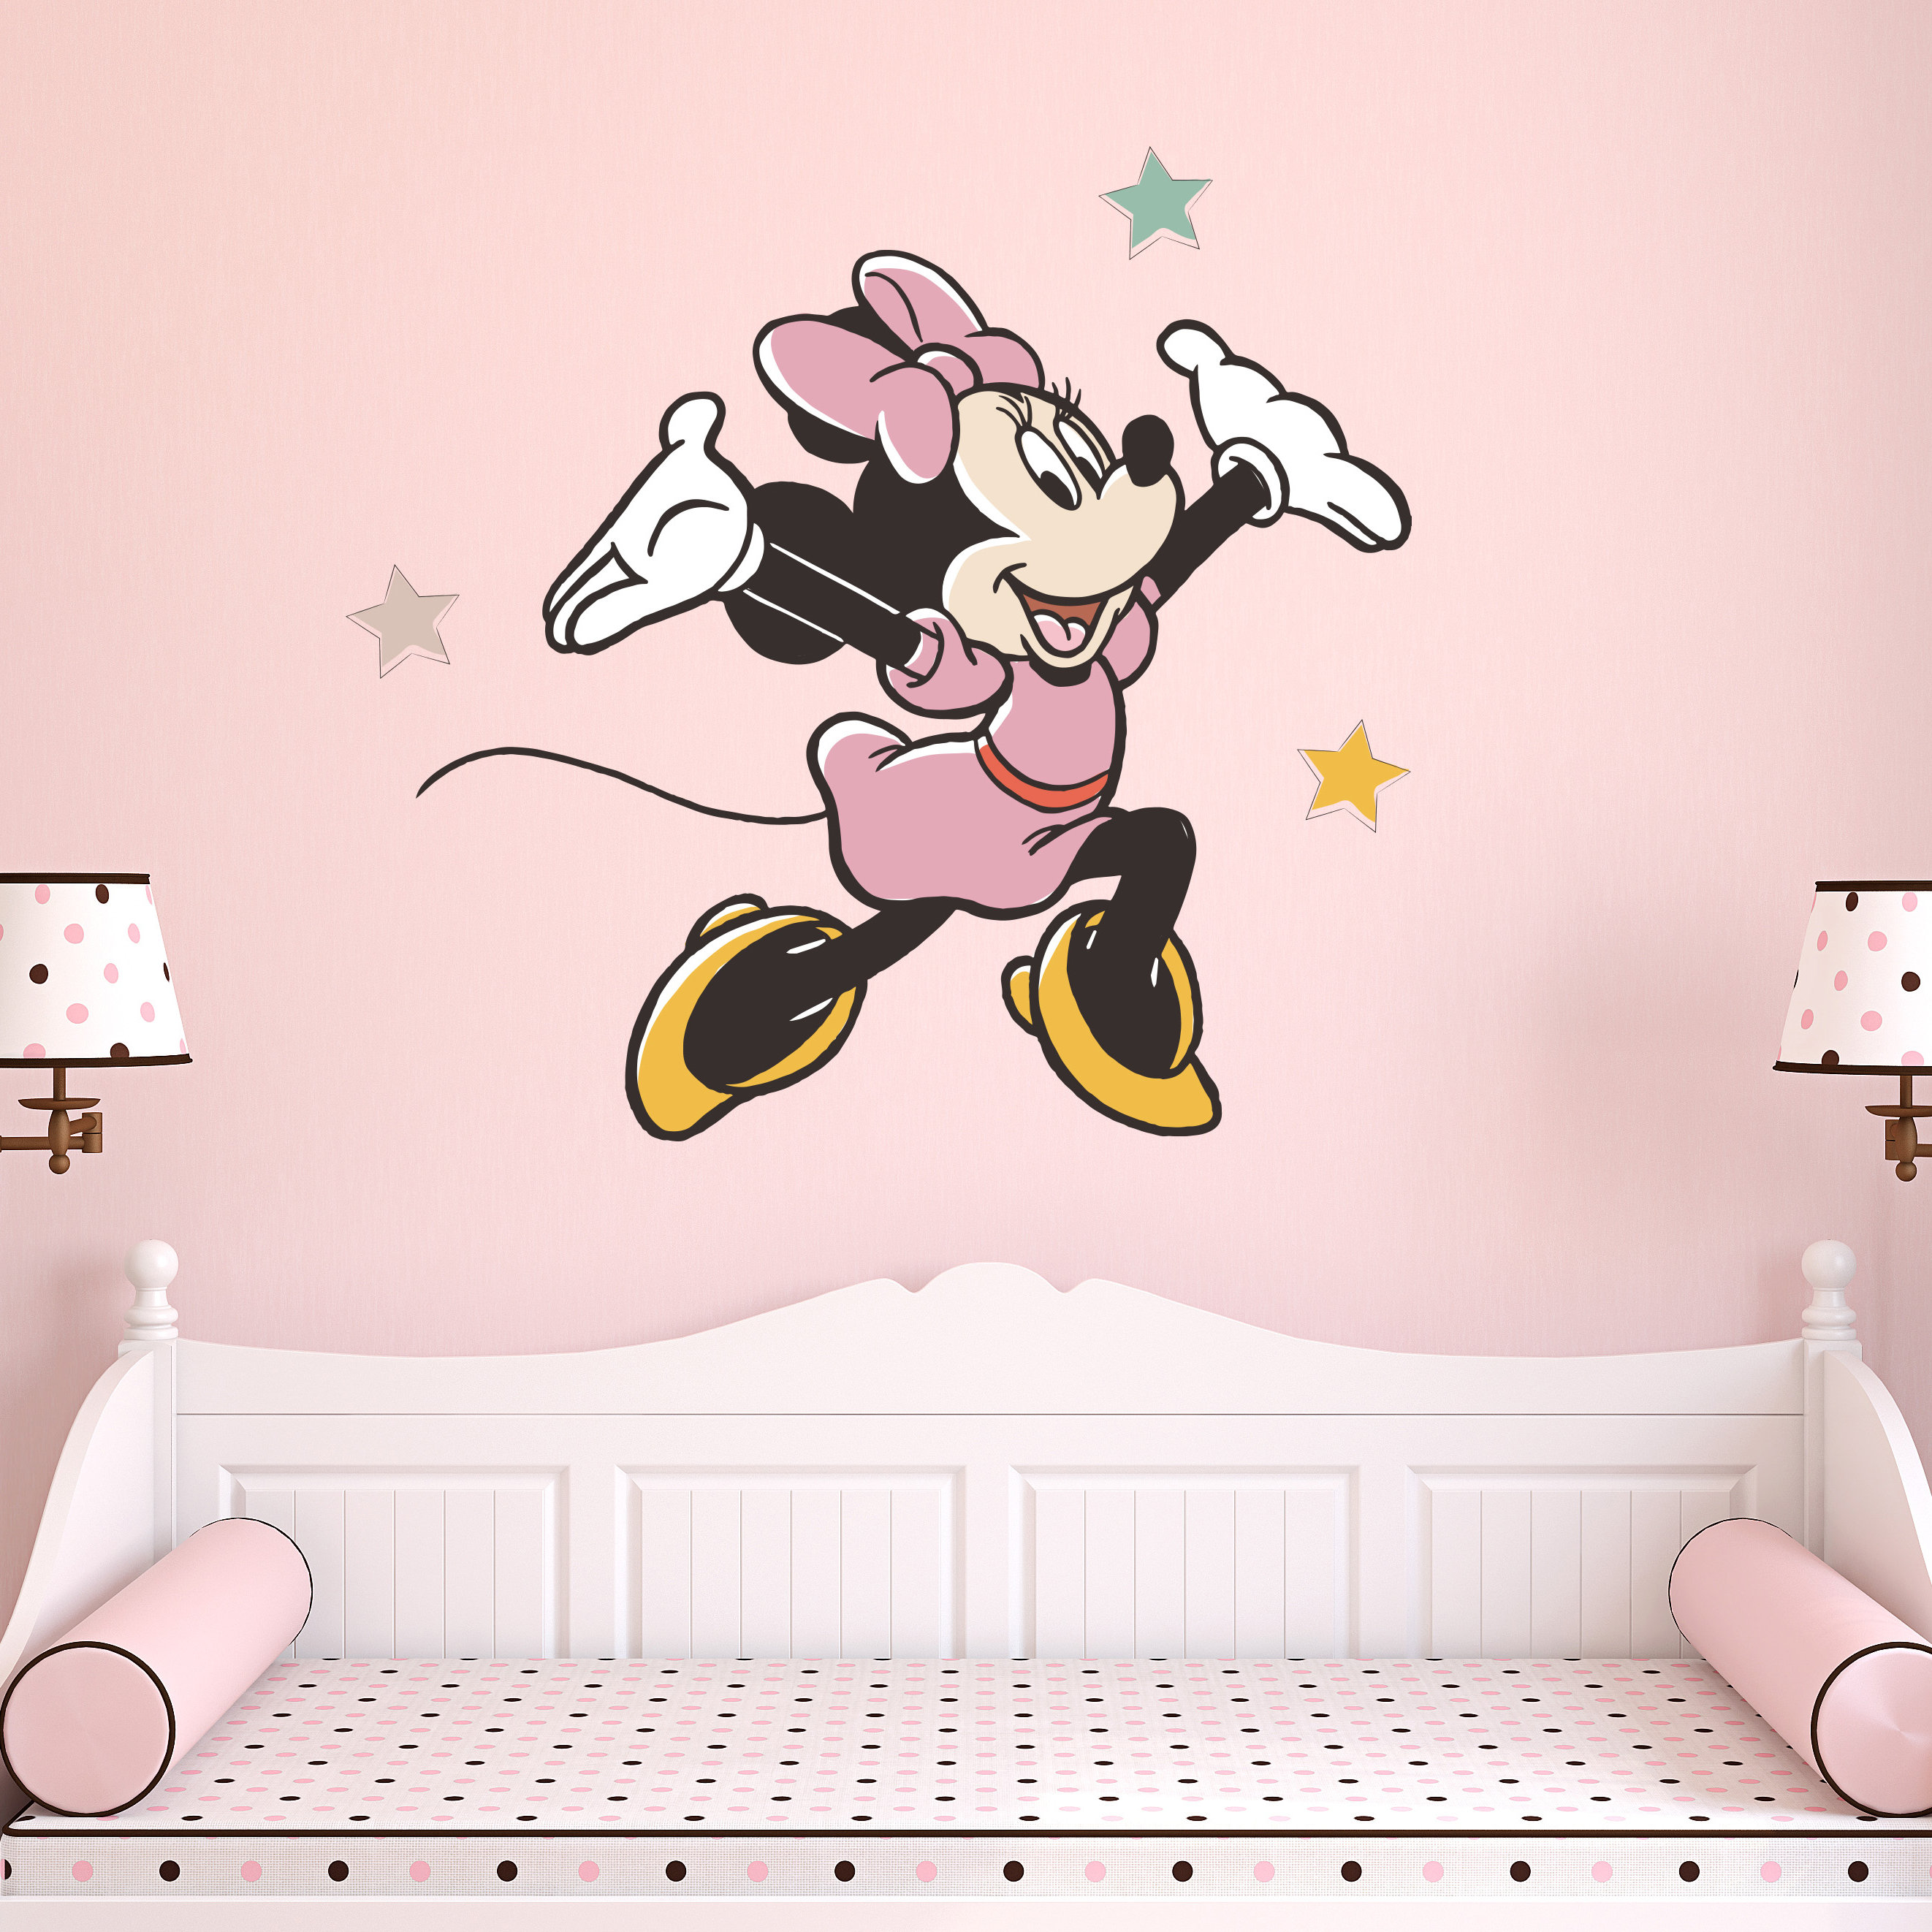 Wall decals of cartoon characters